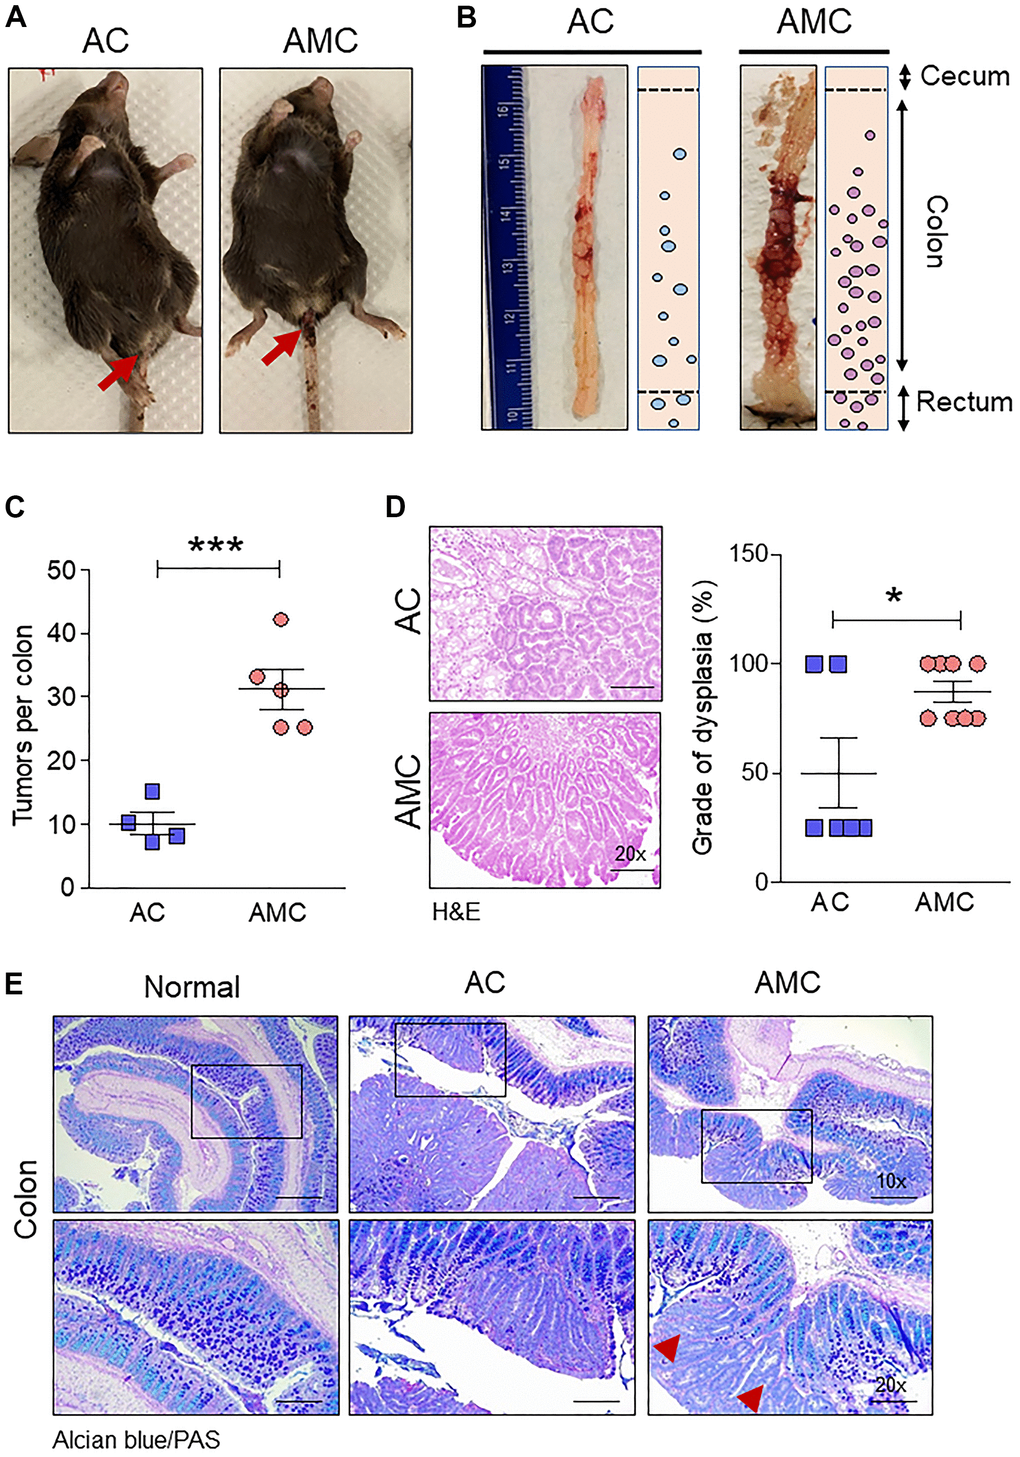 Muc4 deletion drives colorectal tumors with high-grade dysplasia and goblet cell dysfunction. (A) Representative images of AC and AMC animals had typical rectal bleeding. (B, C) Muc4-/- mice in the AMC group showed an increase in the number of macroscopic polyps in the colon and rectal region. n =4-5 per group. (D) H&E staining of AMC animals had a higher grade of dysplasia. n = 6-8 per group. (E) Representative images of double staining of Alcian blue and PAS. n = 6 (AC and AMC) and n=3 for normal group. Red arrowhead indicates loss of mucins expression in the goblet cells in AMC mice. *p p 